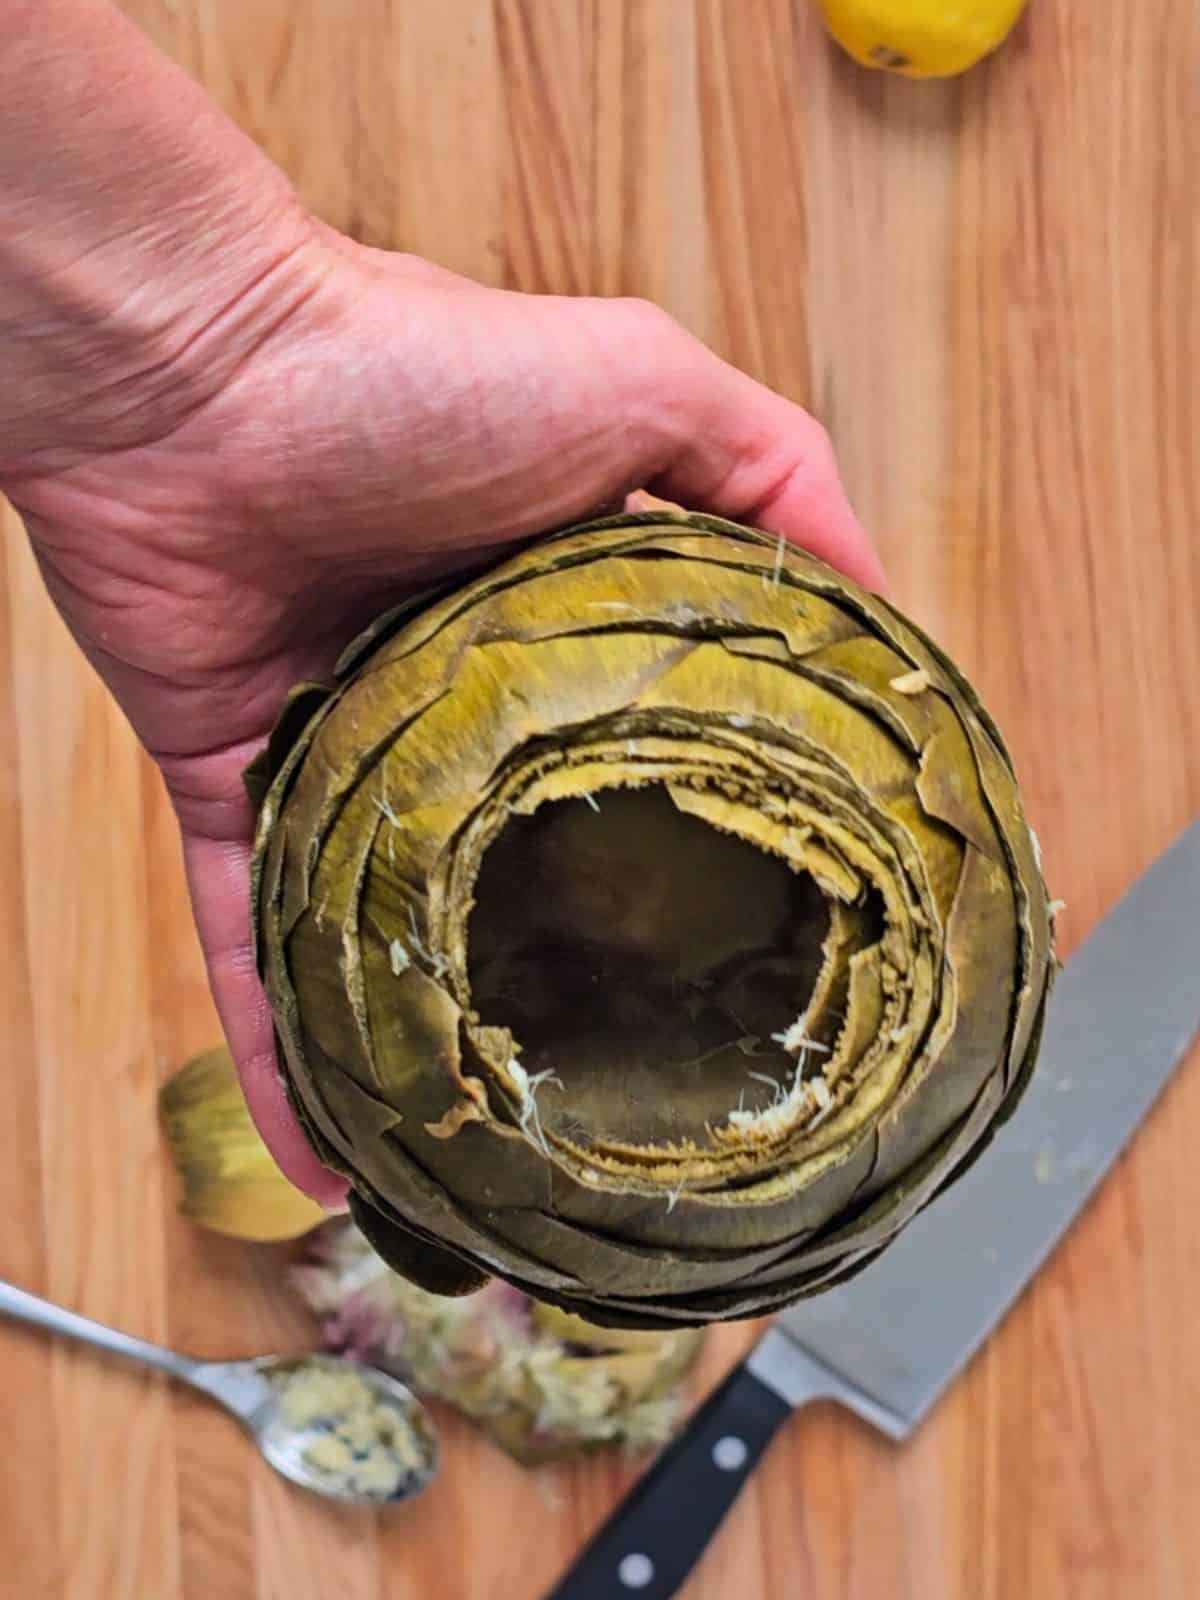 Whole artichoke that has been hollowed out with spoon and choke discarded on wooden cutting board in background.